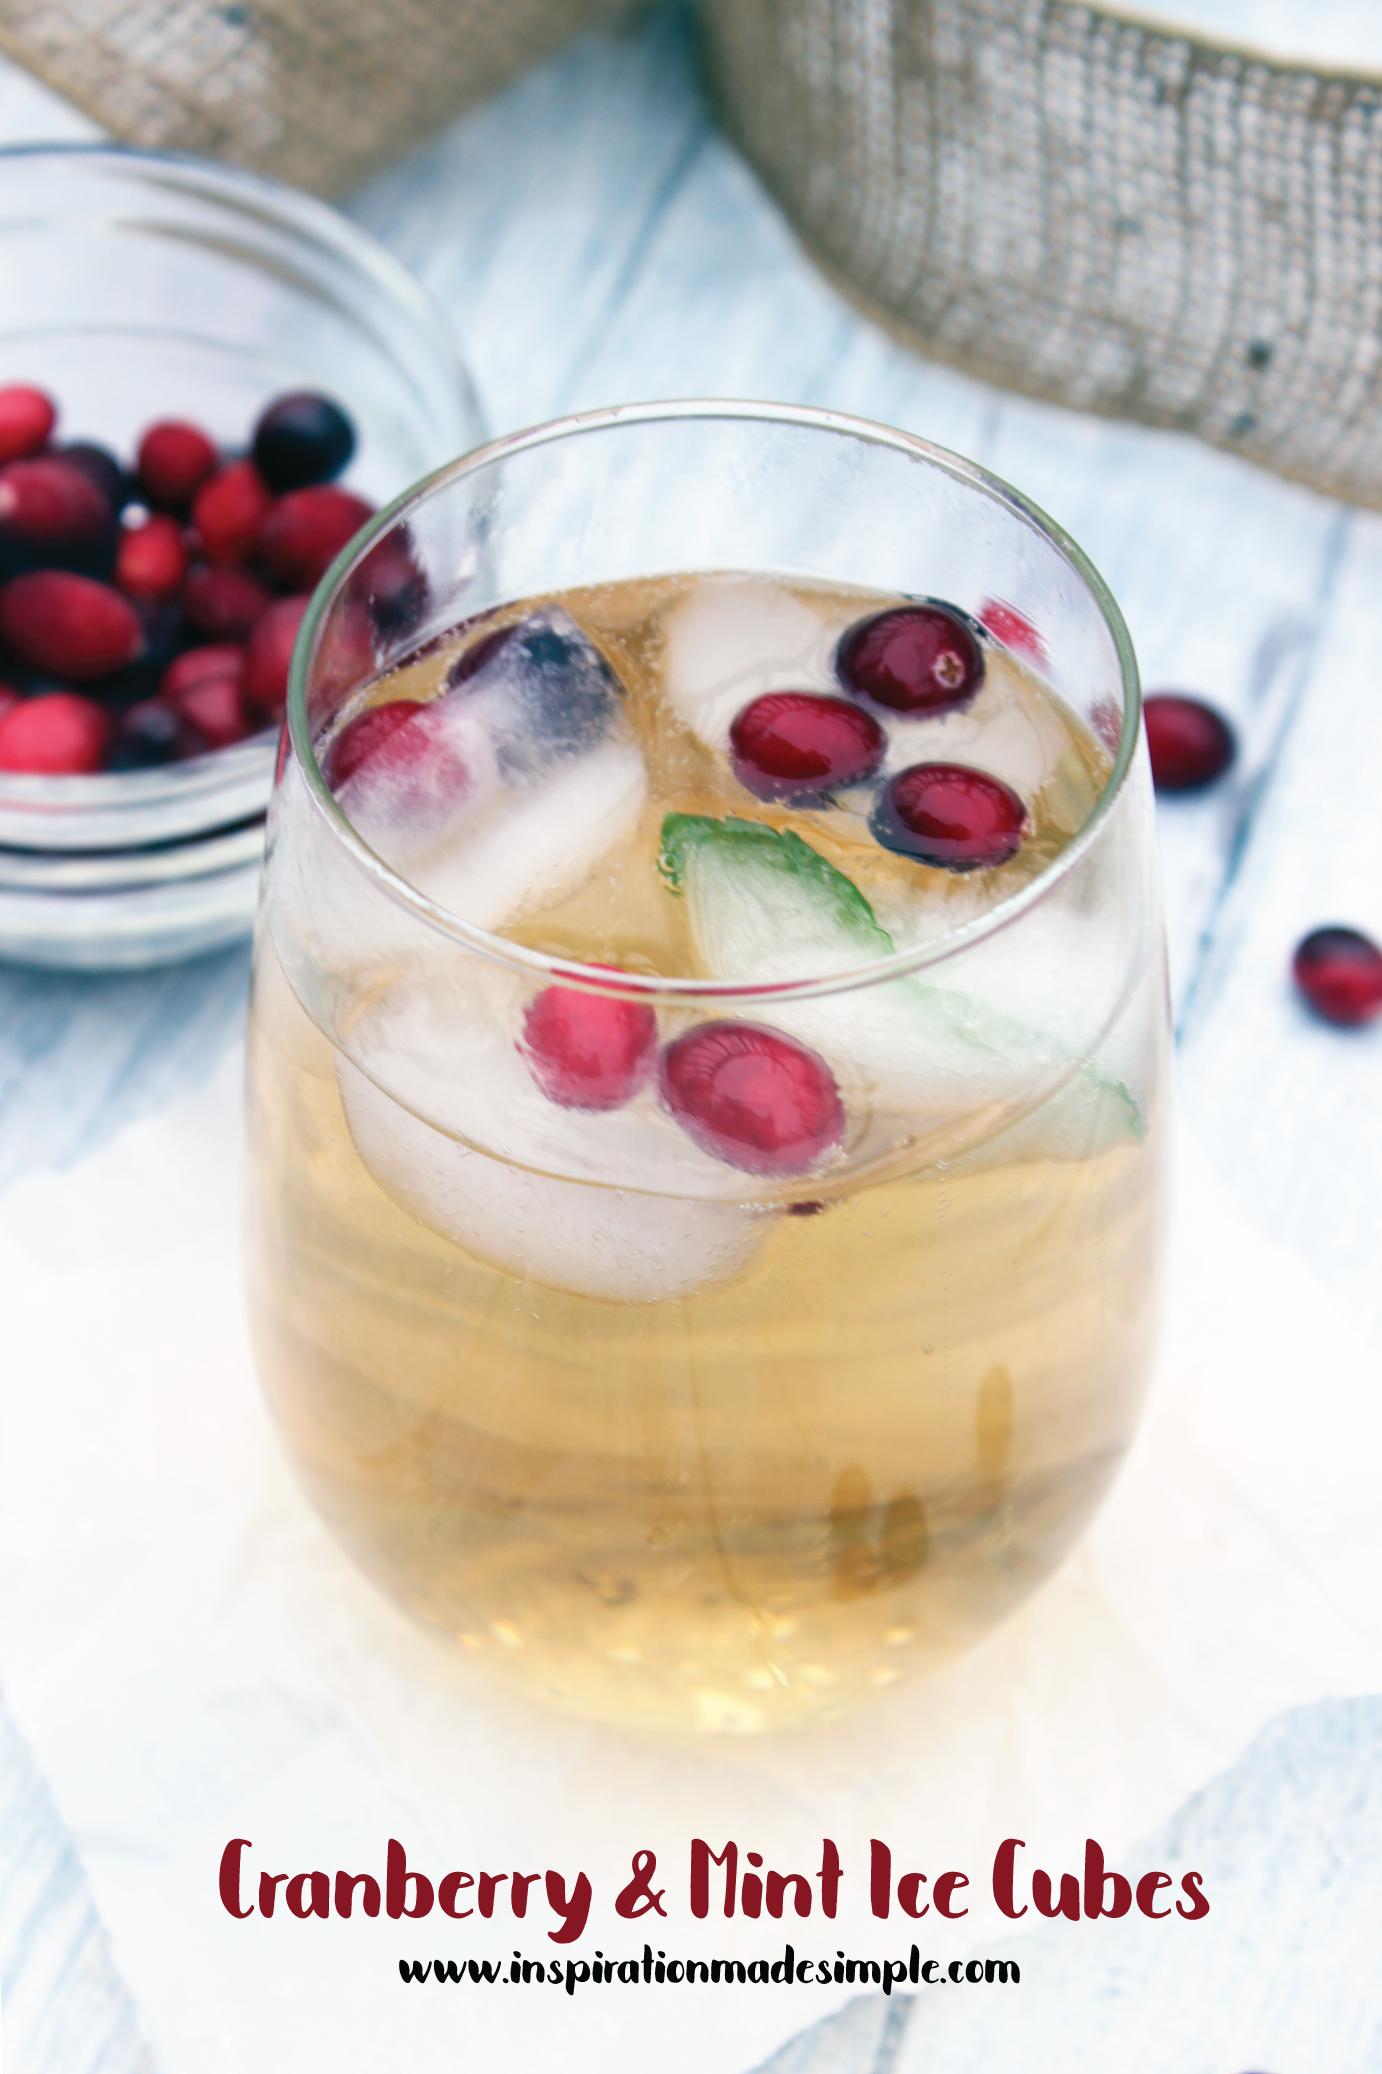 https://www.inspirationmadesimple.com/wp-content/uploads/2019/12/cranberry-ice-cubes.png